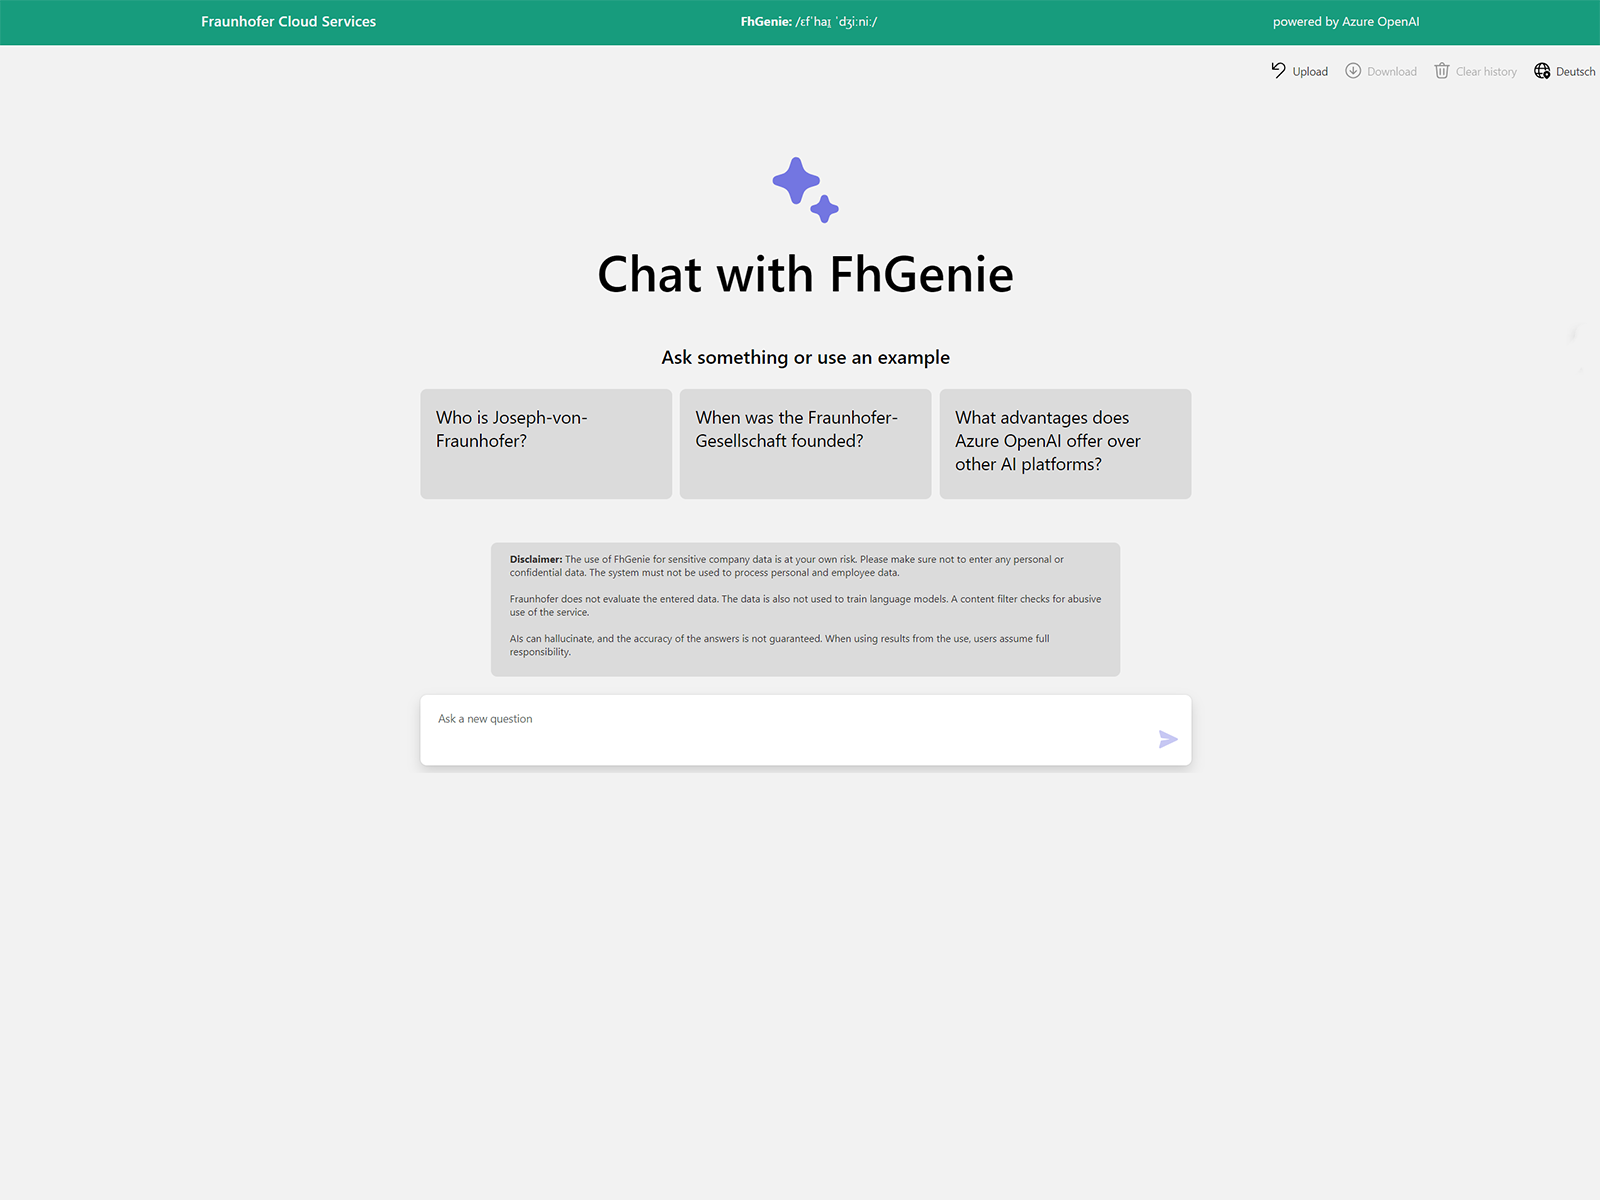 The FhGenie generative AI solution lets employees securely create, edit or modify texts on the basis of non-public data.